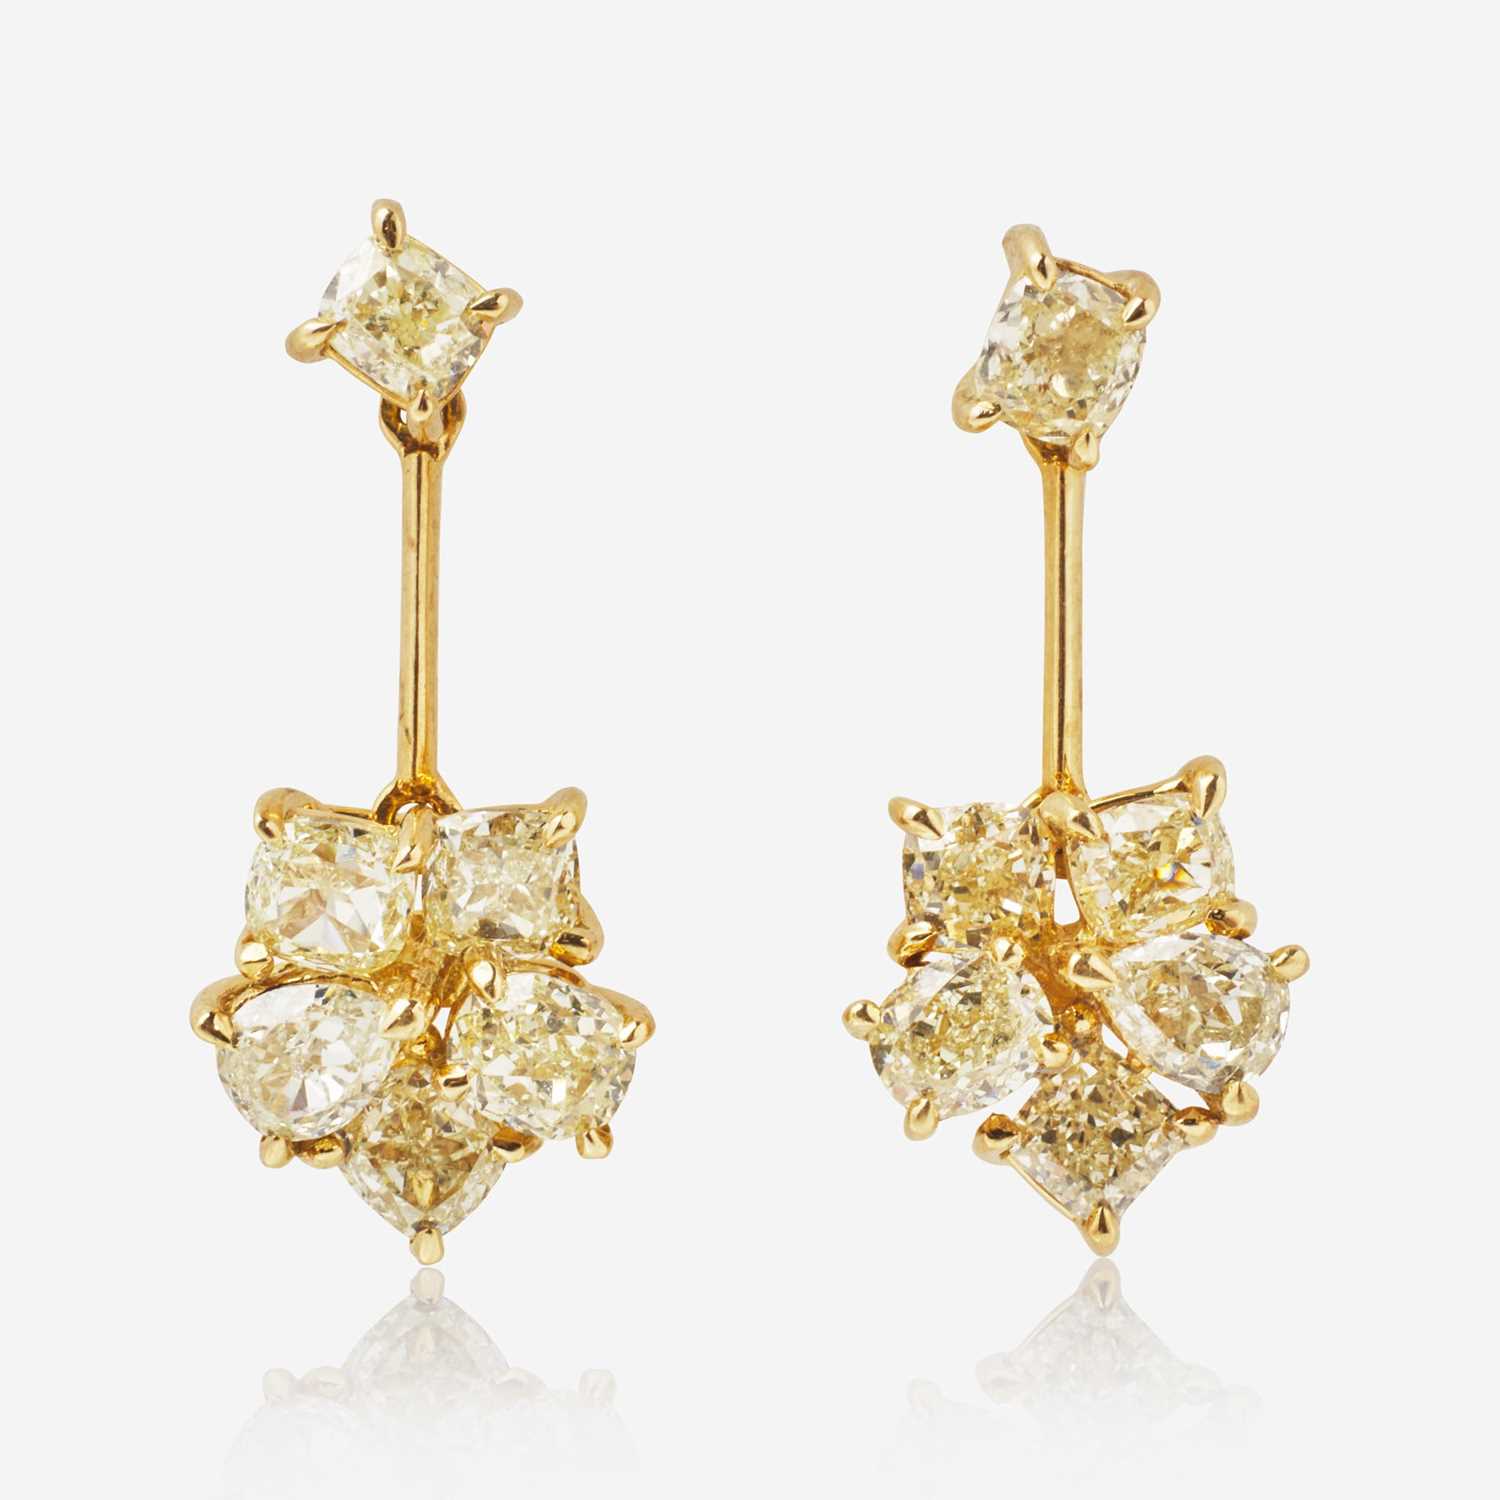 Lot 16 - A Pair of 18K Yellow Gold and Diamond Earrings